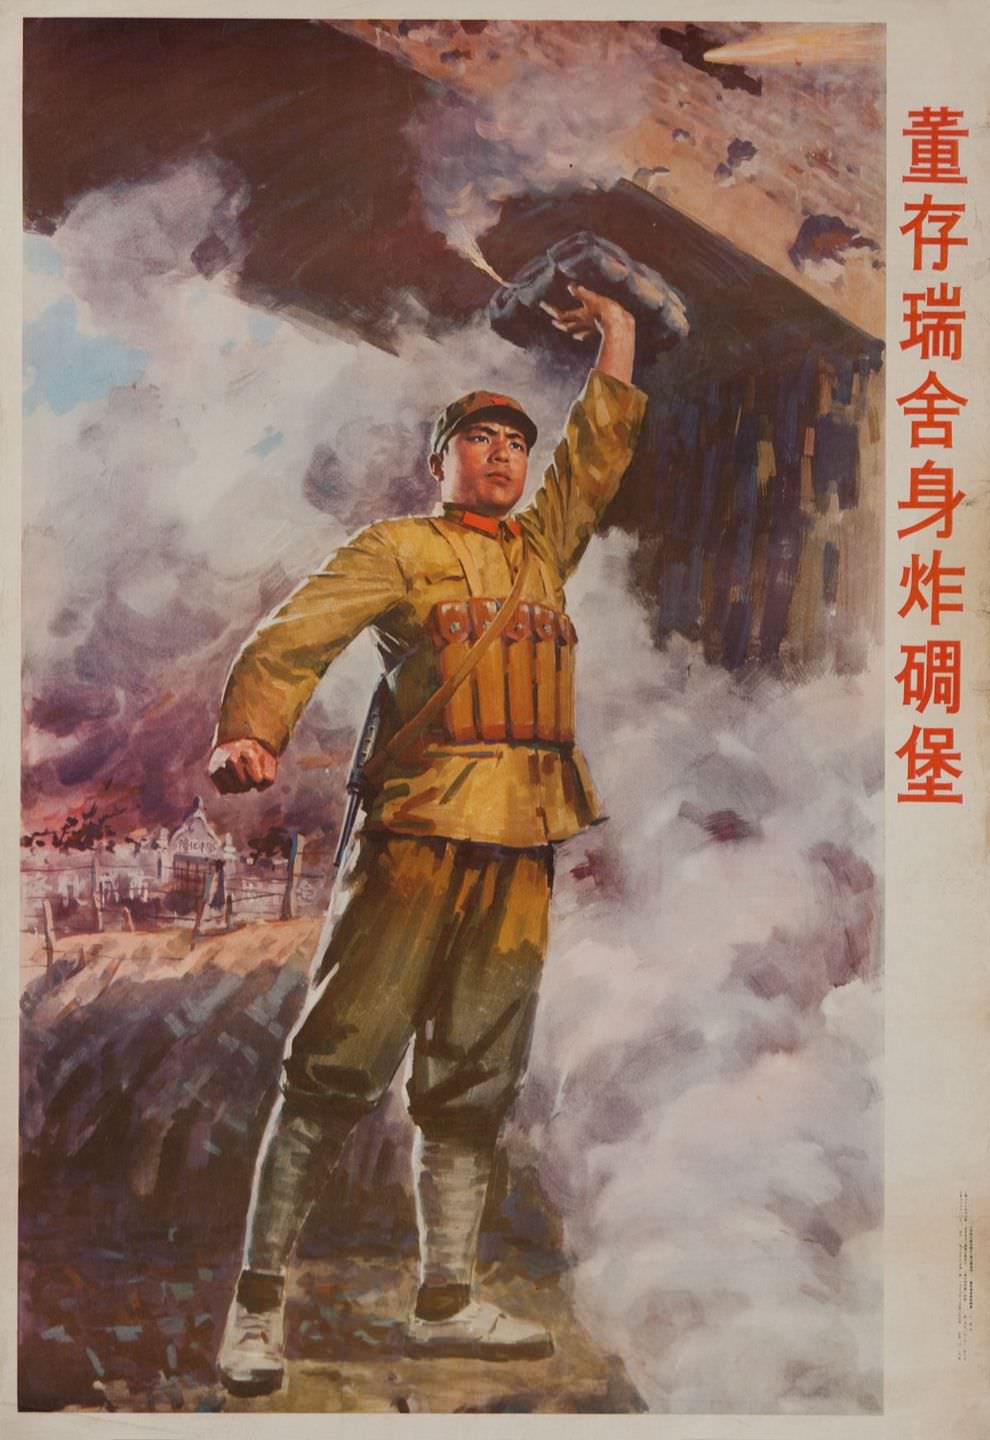 A depiction of Dong Cunrui, who sacrificed his own life in 1949 during the Chinese Civil War while detonating explosives in an enemy bunker.1960